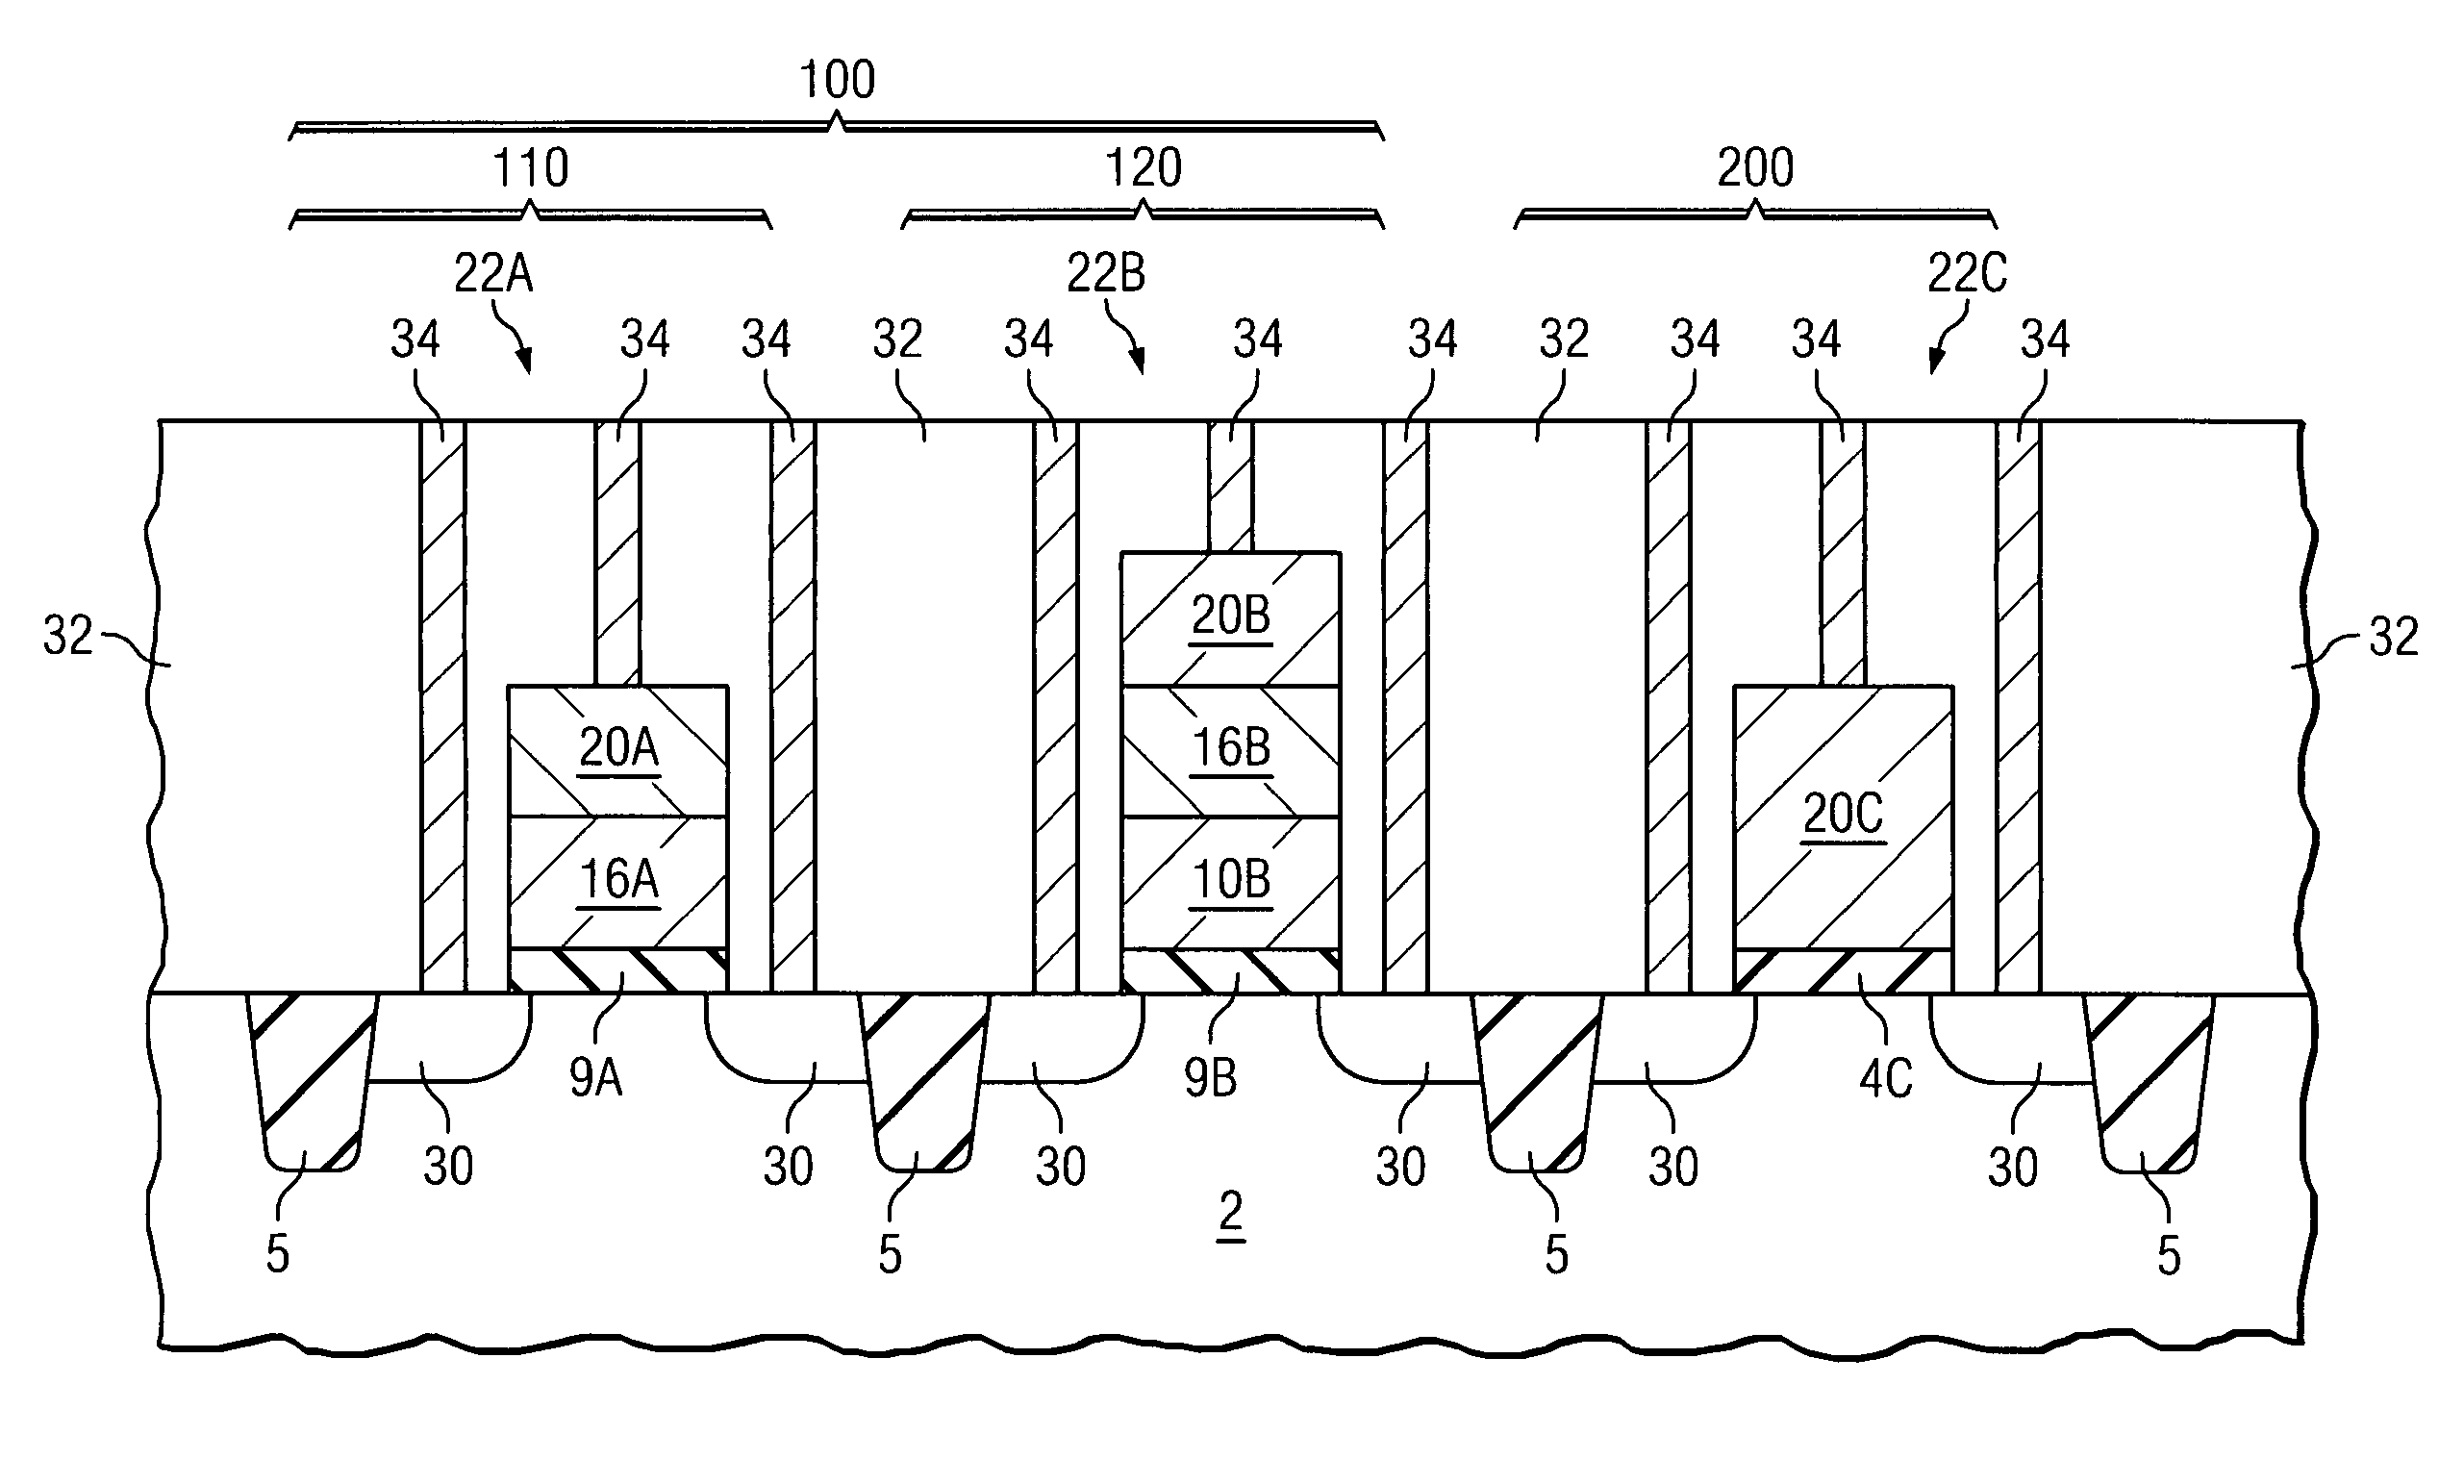 Composite gate structure in an integrated circuit